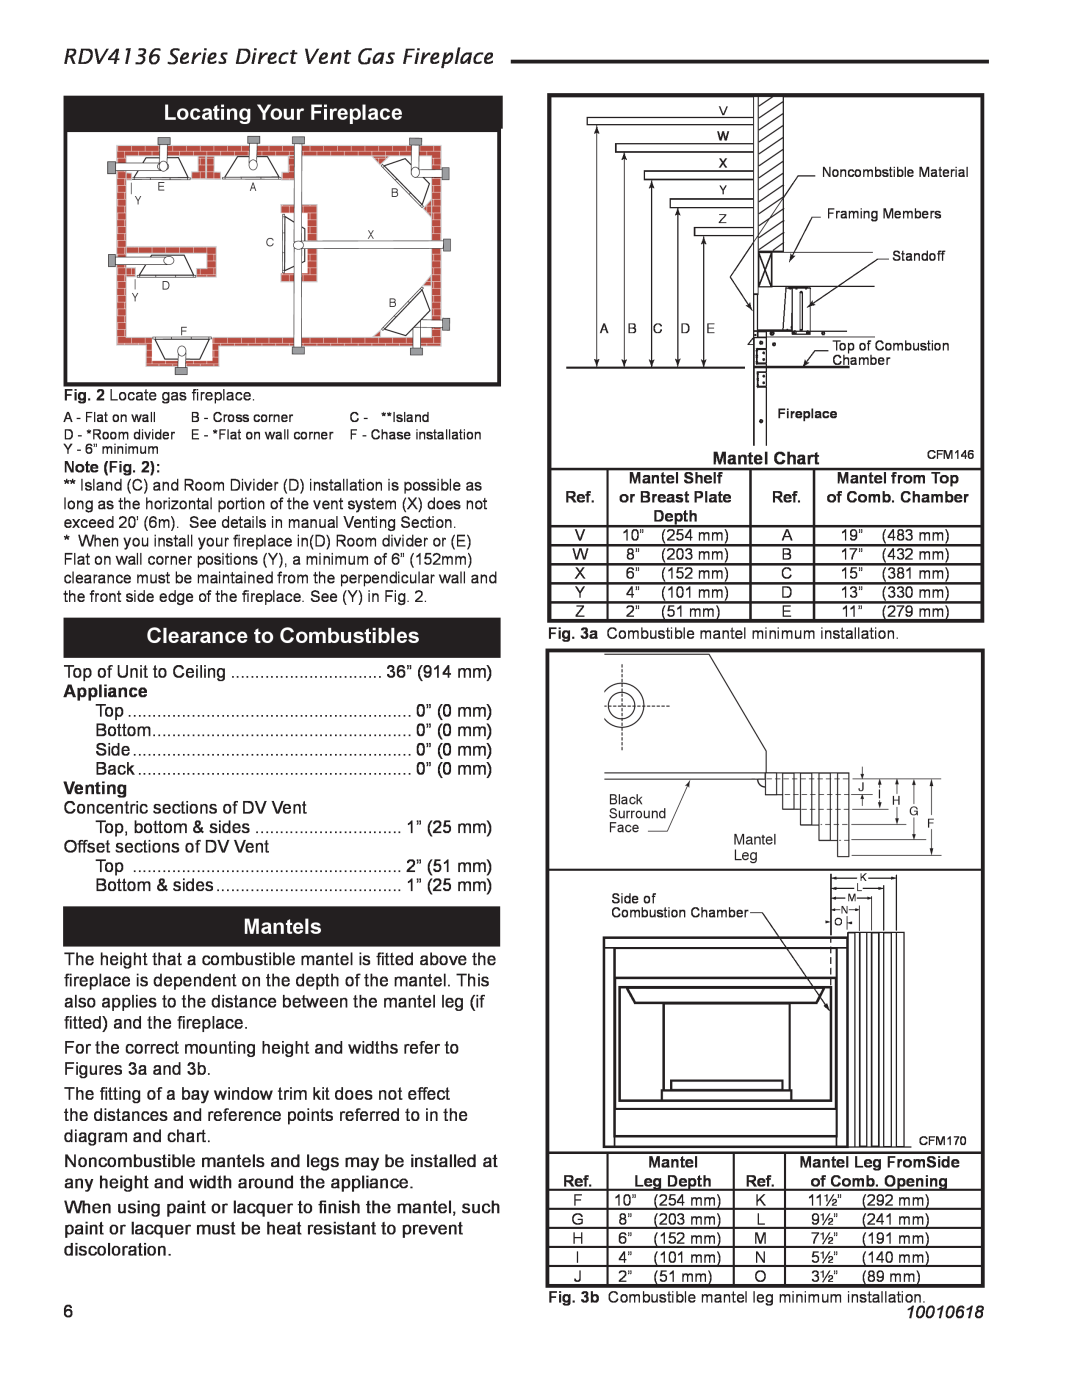 Majestic Appliances RDV4136 installation instructions Locating Your Fireplace, Clearance to Combustibles, Mantels, 10010618 